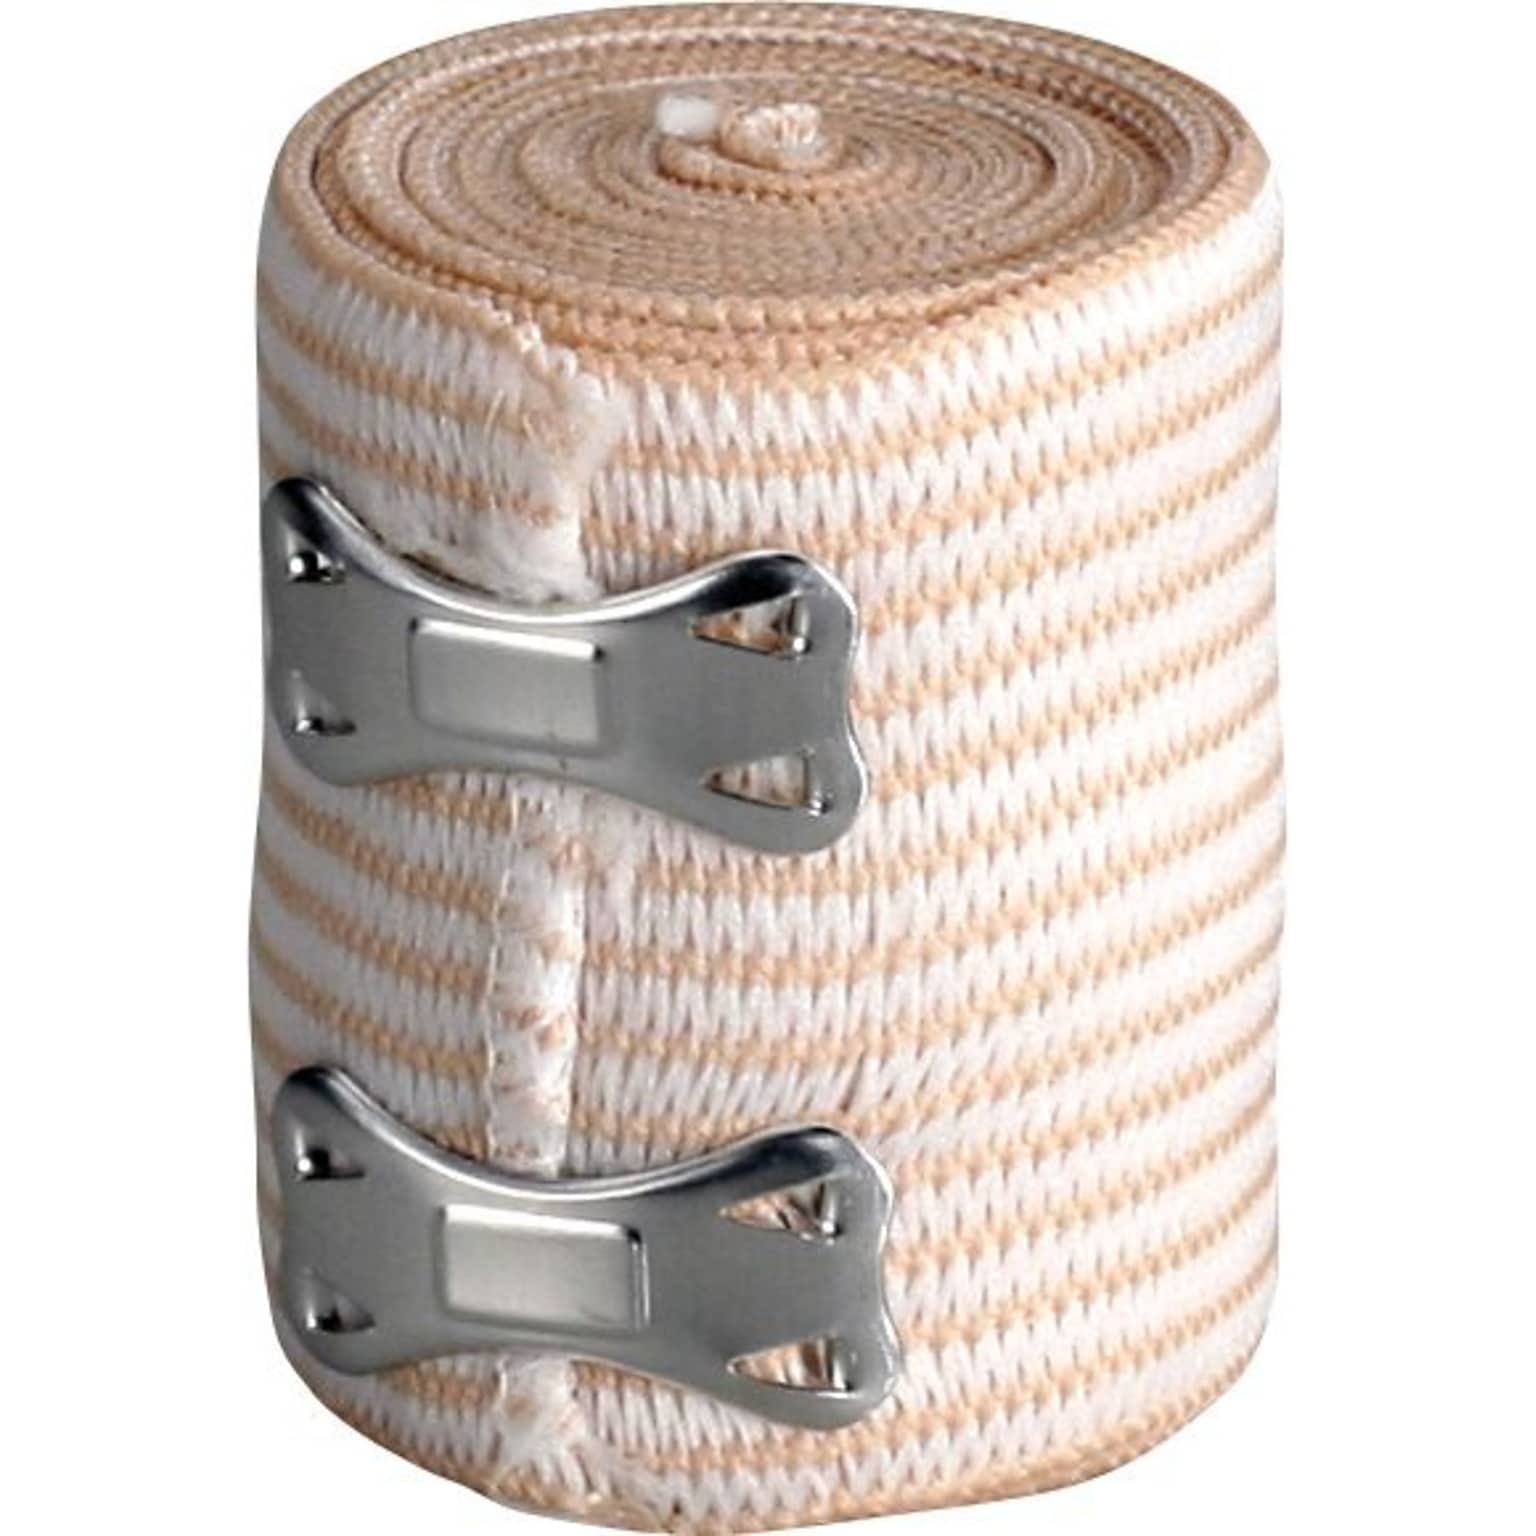 First Aid Only Elastic Bandage Wrap, 2 x 5 yds. (730016)